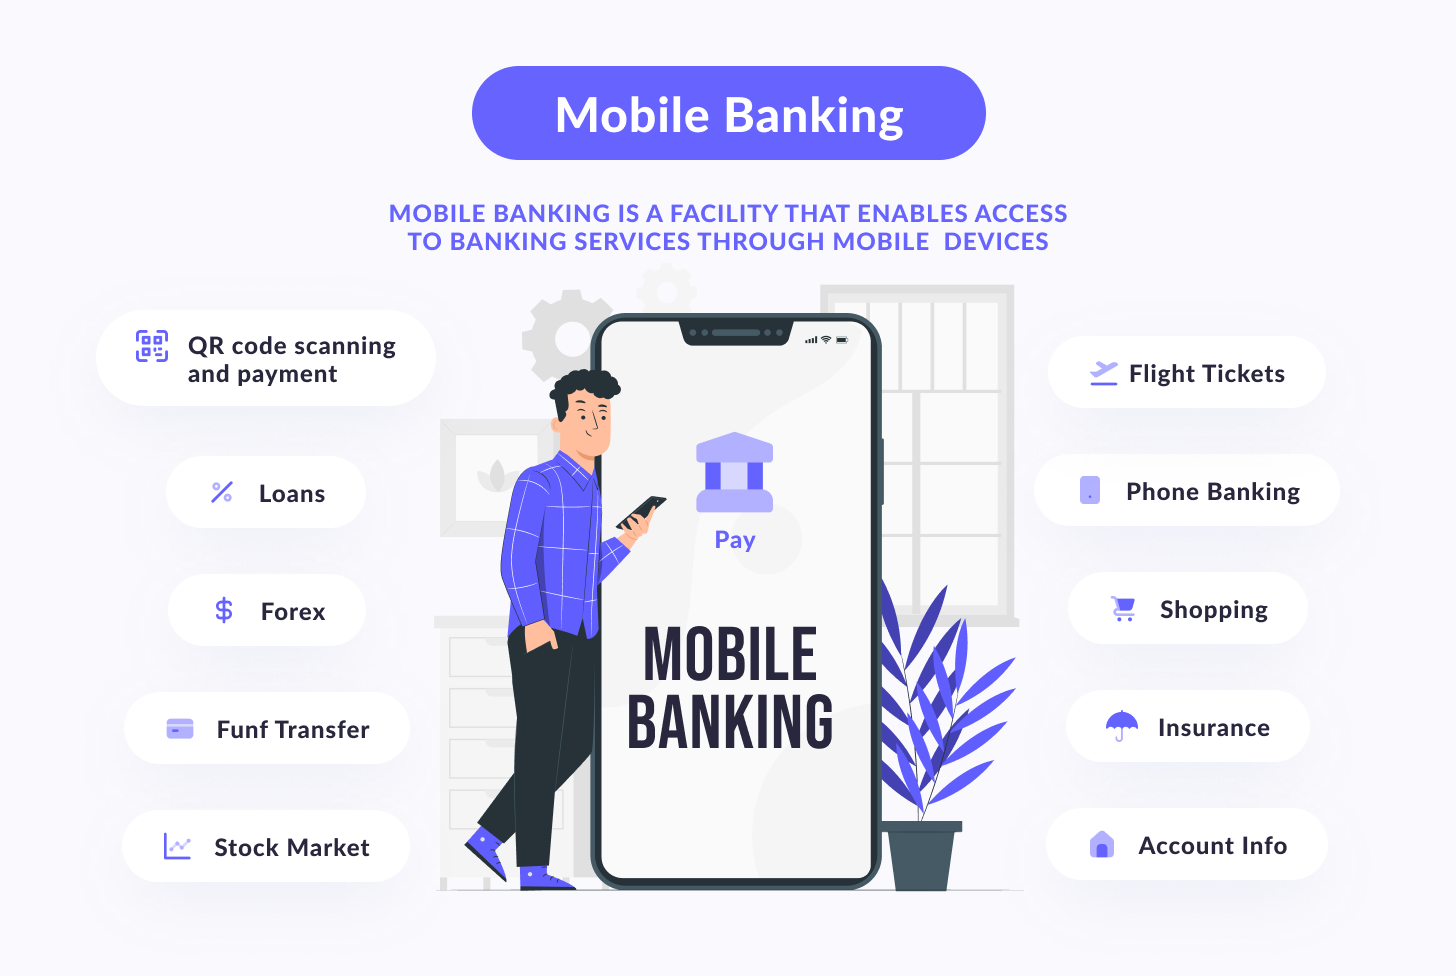 Components of the mobile banking